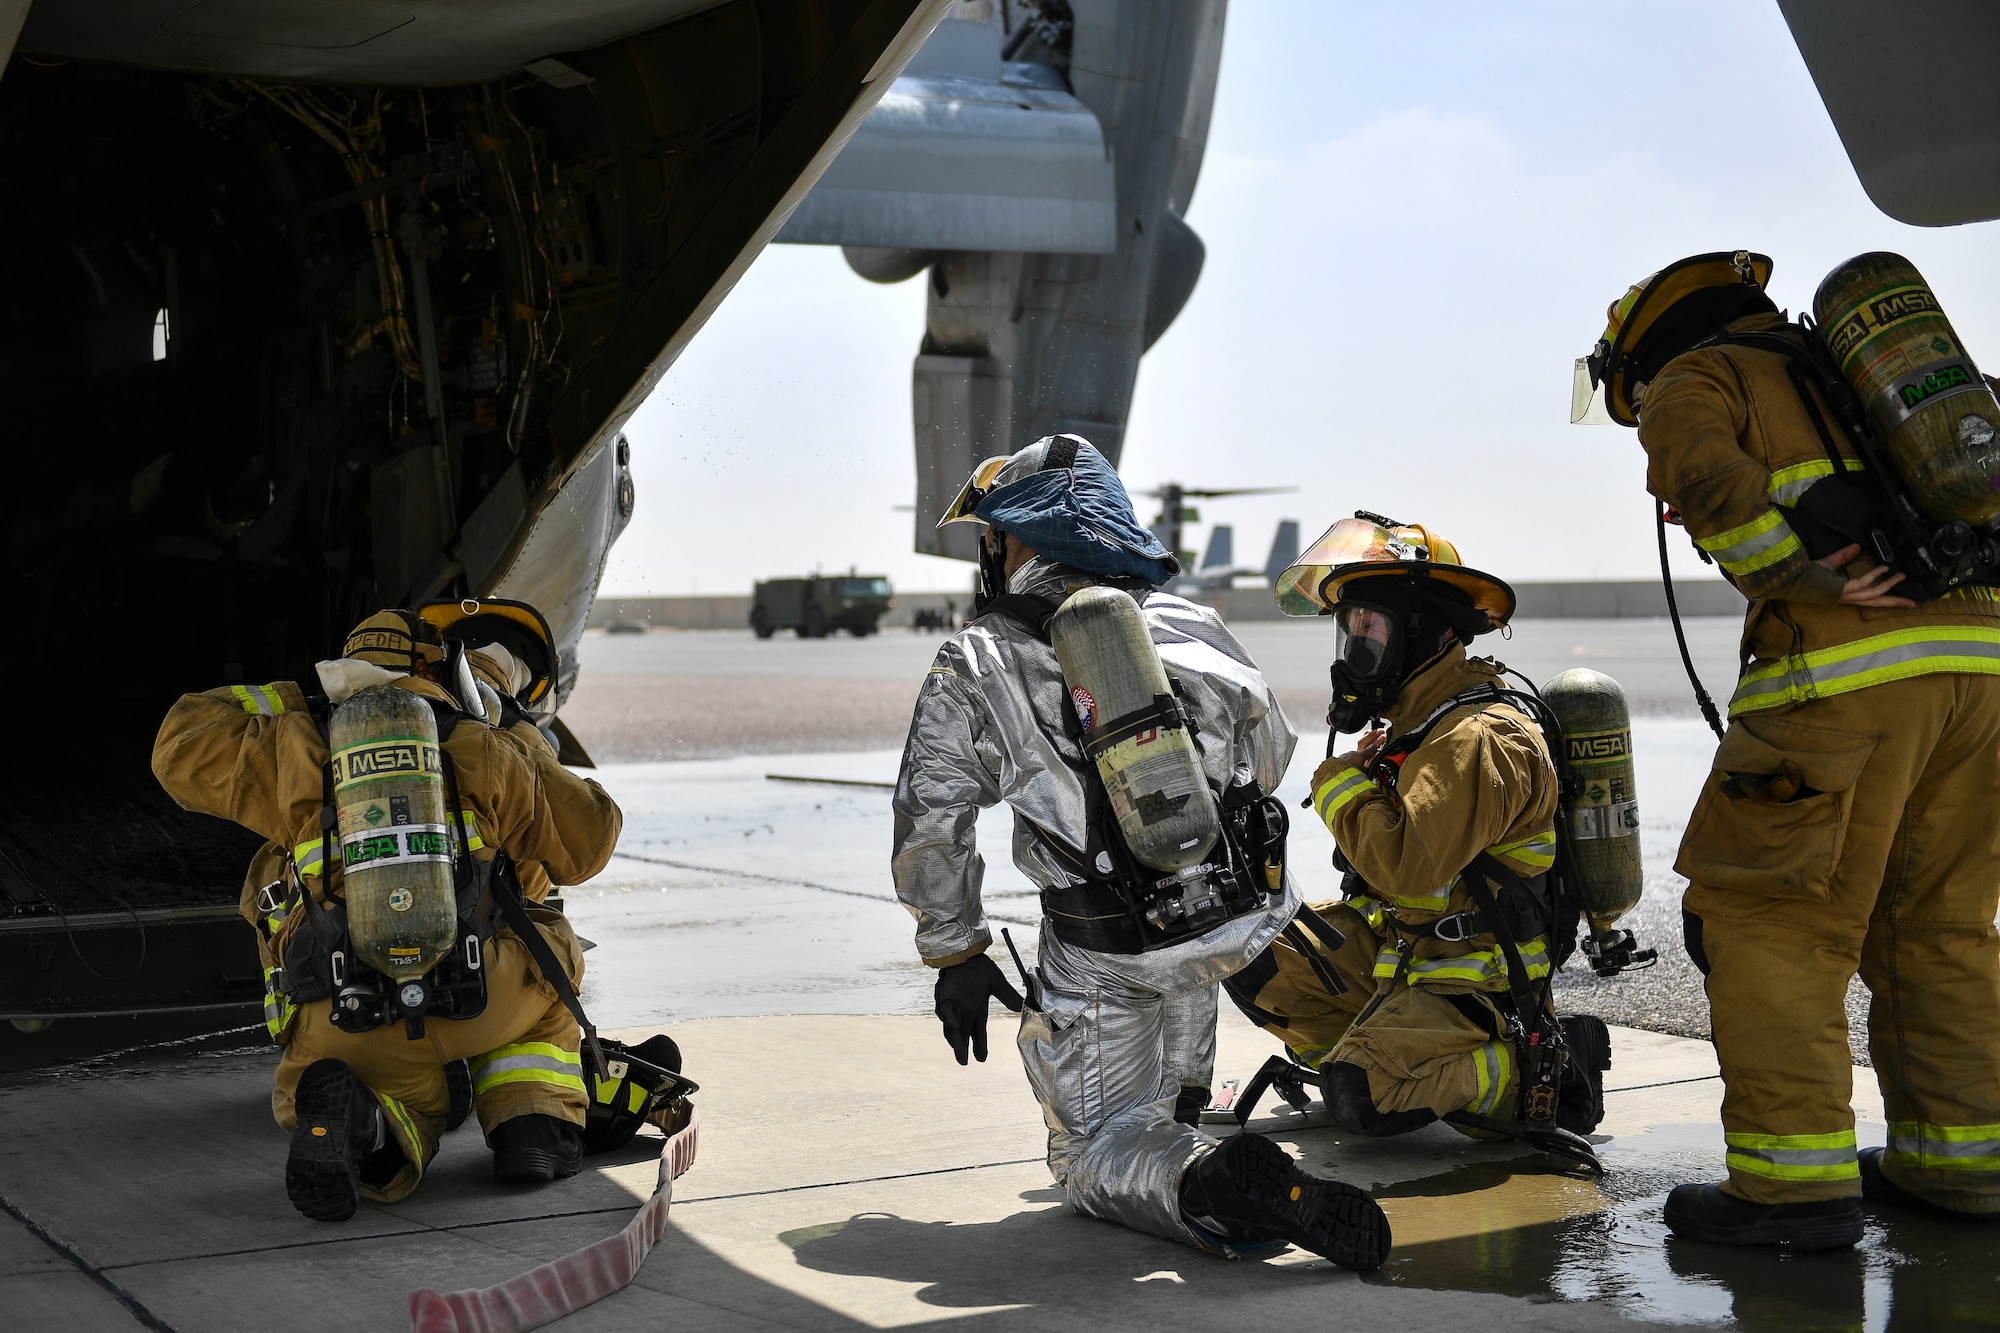 Firefighters from the 407th Expeditionary Civil Engineer Squadron prepare to enter an MV-22 Osprey during an airfield exercise at Ahmed al-Jaber Air Base, Kuwait, Aug. 16, 2019. The exercise was an opportunity for service members from multiple branches to cooperate on one of the most intense scenarios a firefighter could be called for: an aircraft on fire on the flightline. (U.S. Air Force photo by Staff Sgt. Mozer O. Da Cunha)